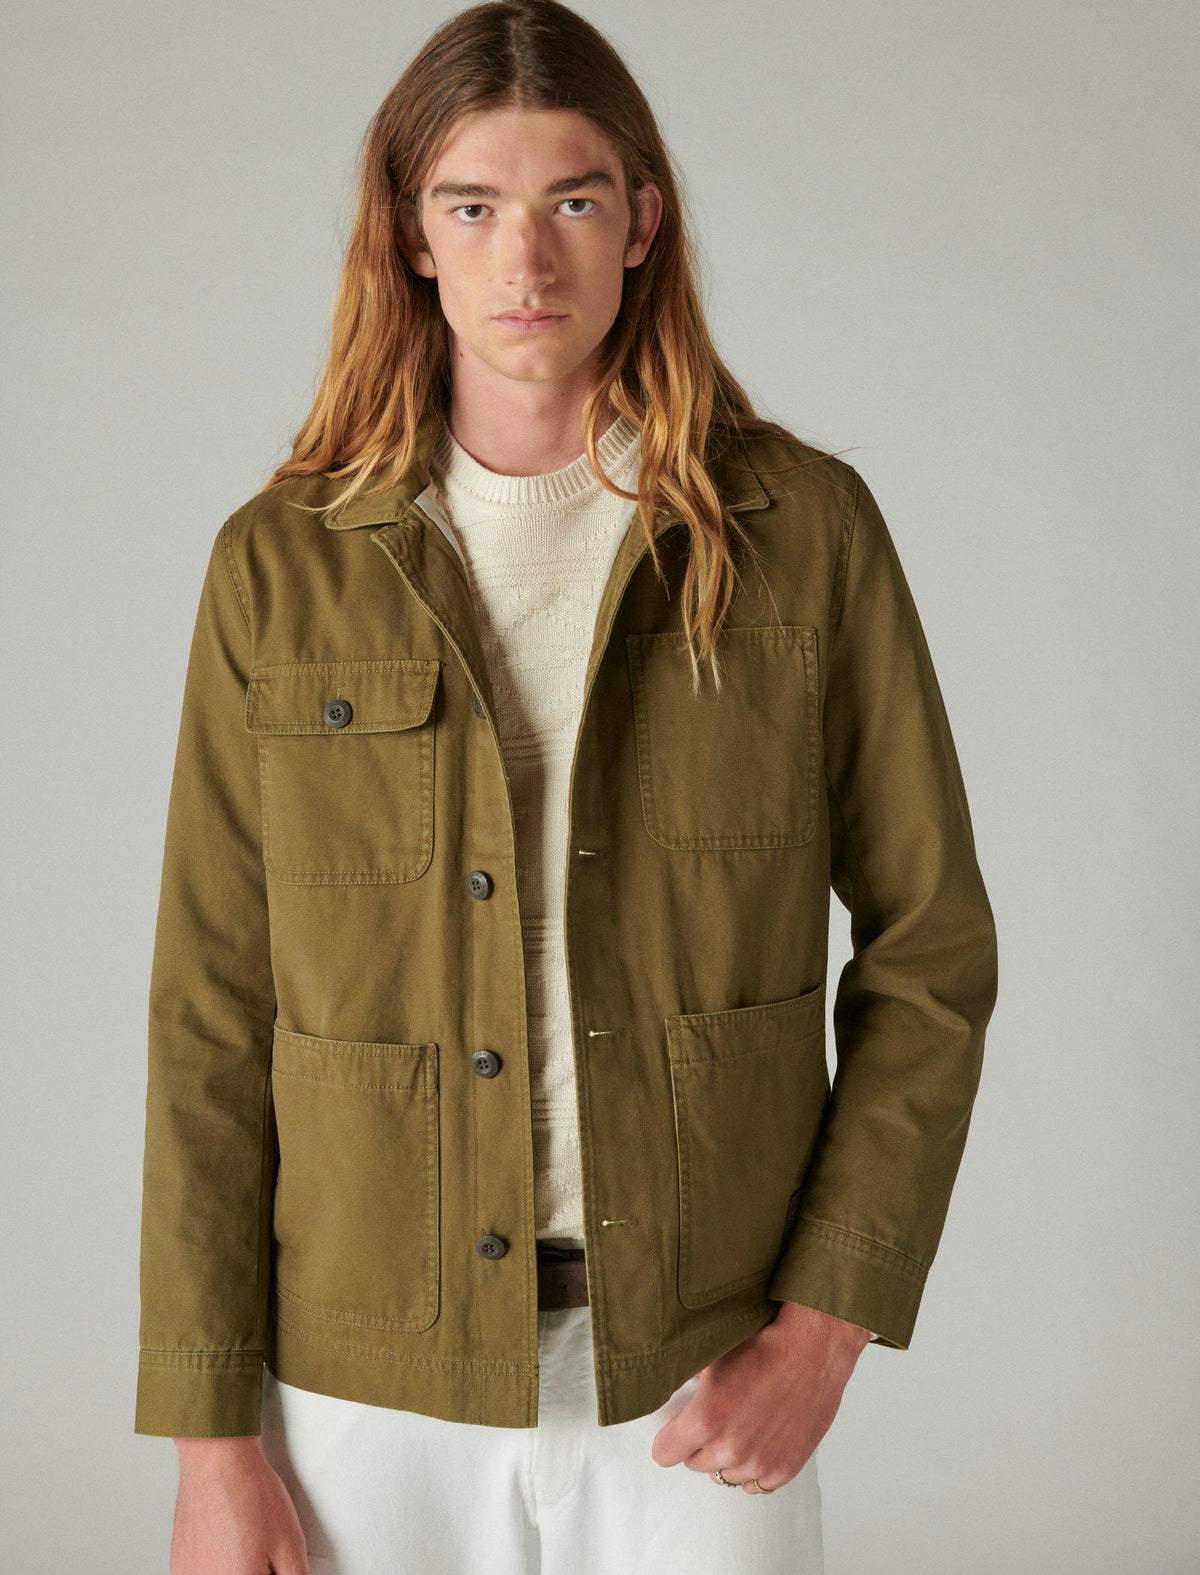 Lucky Brand Chore Jacket - Men's Clothing Outerwear Jackets Coats Olive